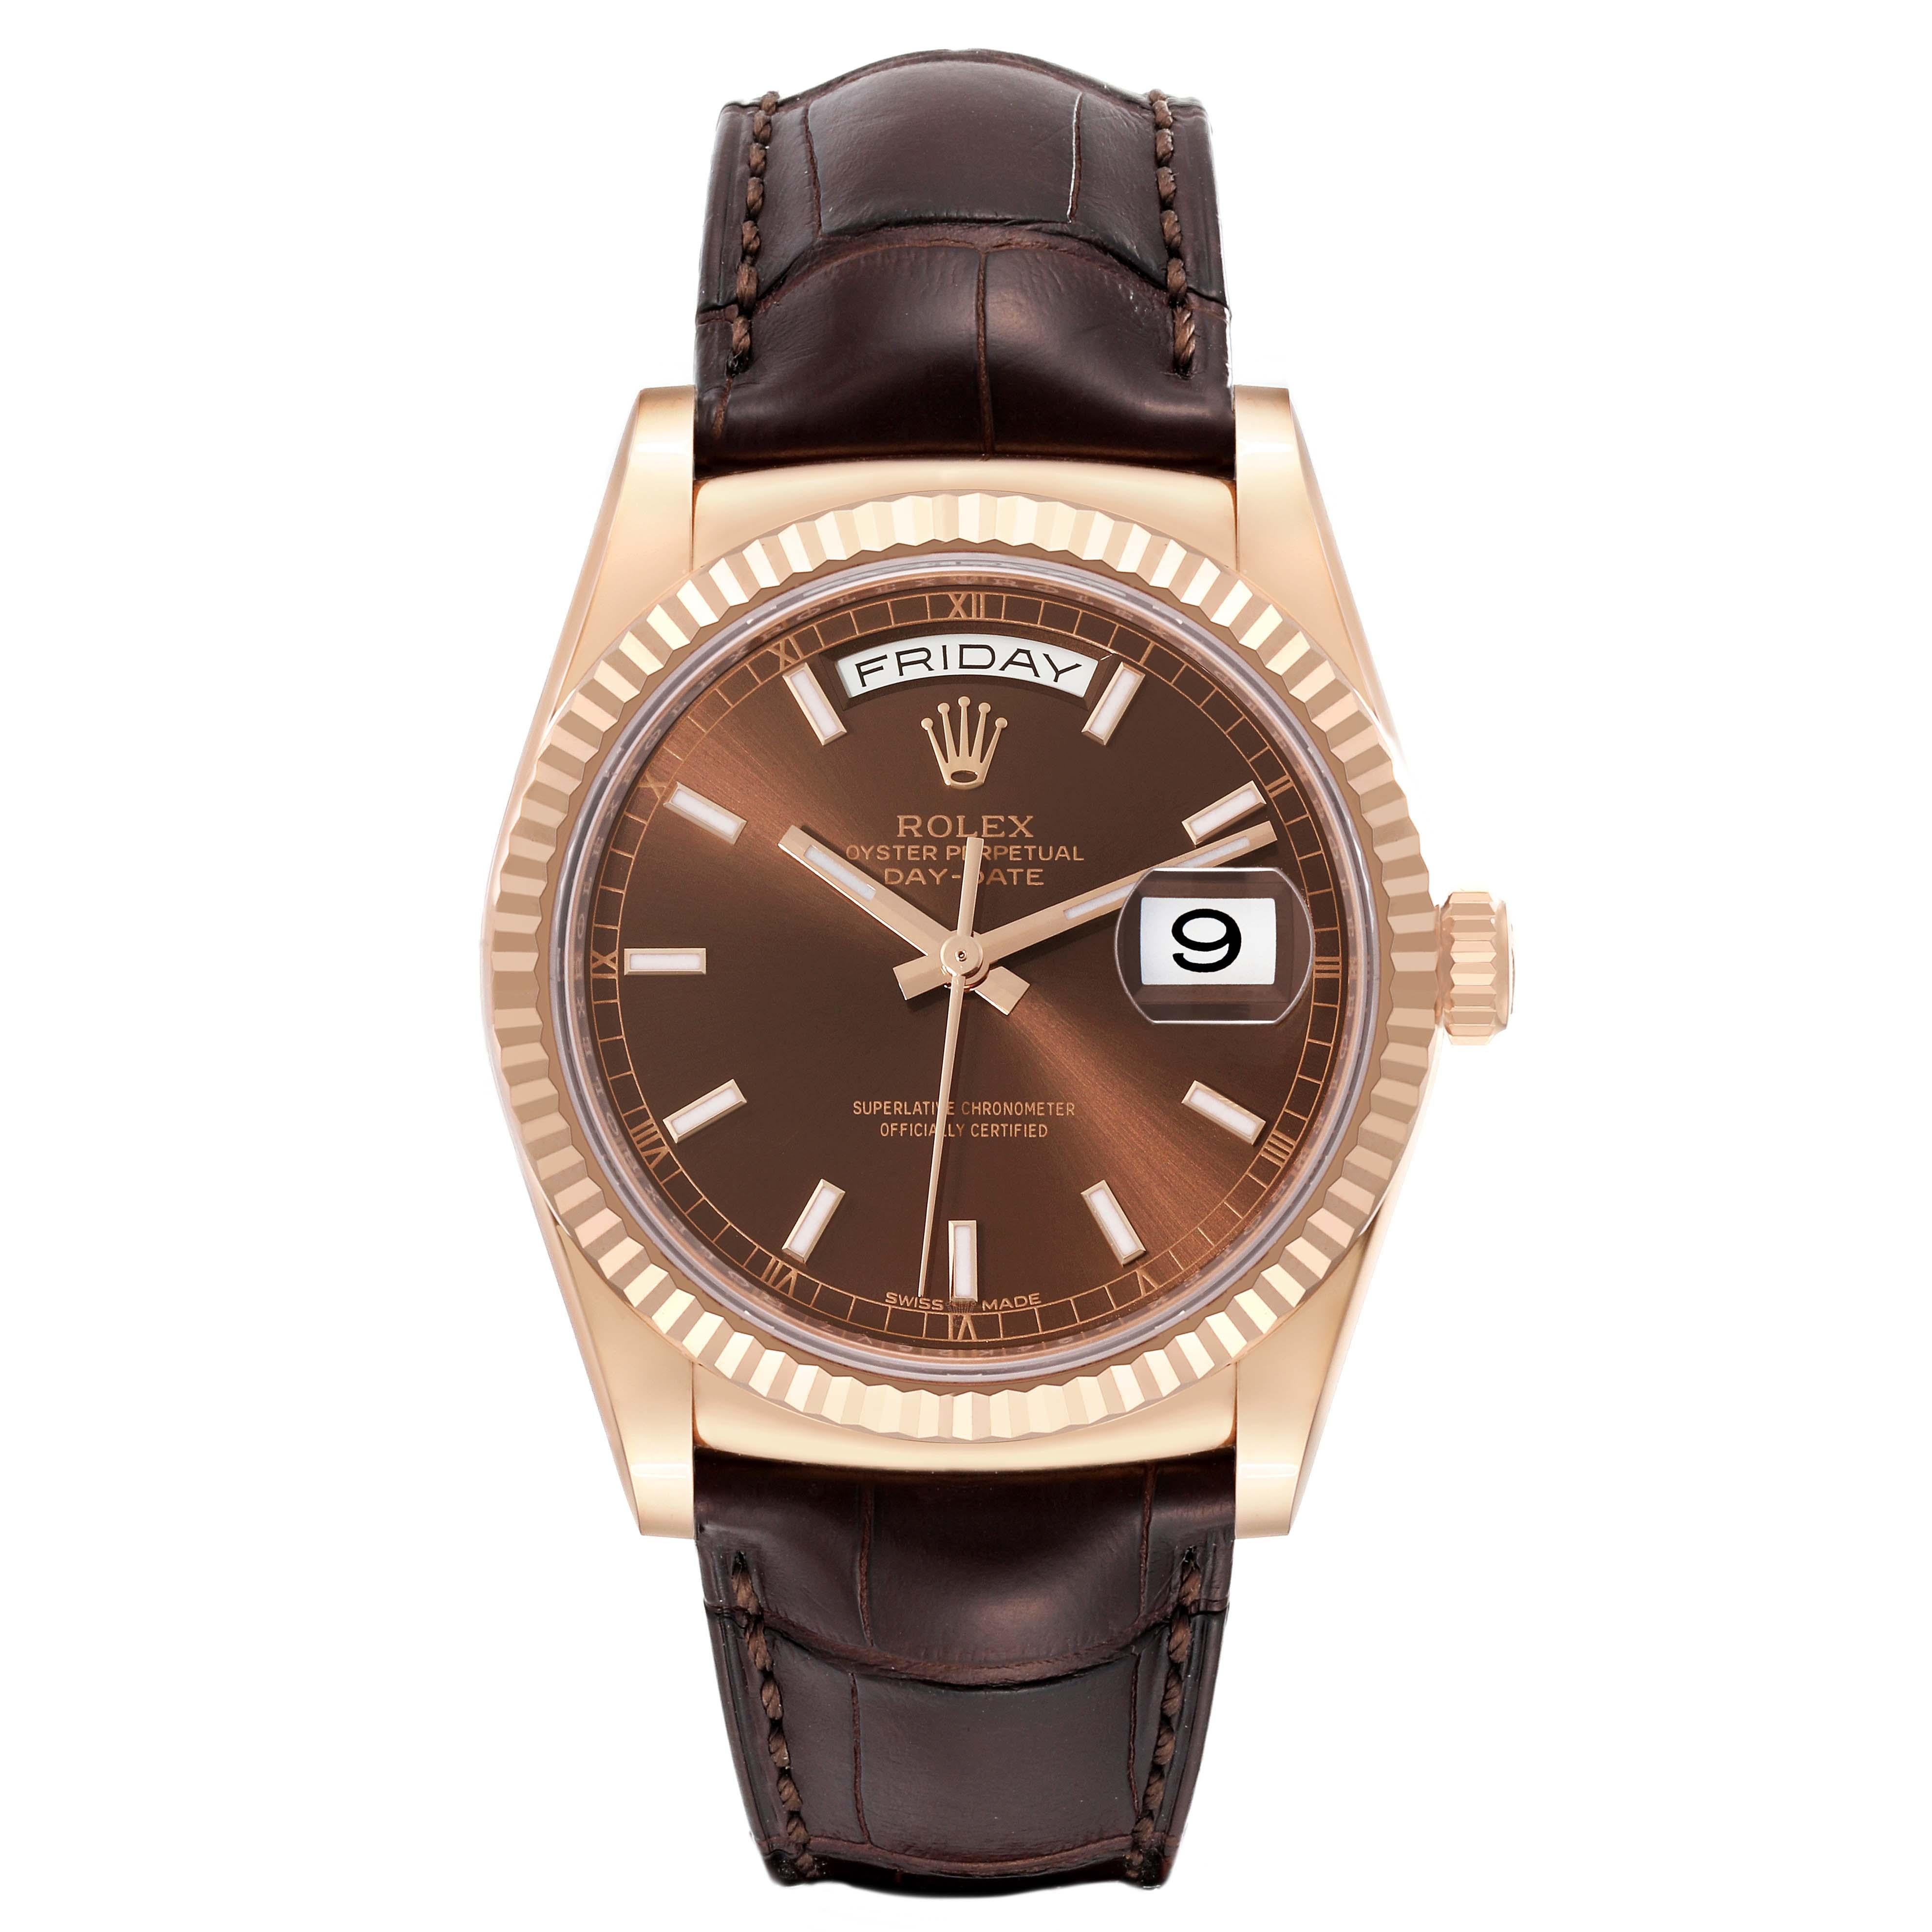 Rolex President Day-Date Rose Gold Chocolate Dial Mens Watch 118135 Box Card. Officially certified chronometer automatic self-winding movement. 18k rose gold oyster case 36.0 mm in diameter. Rolex logo on the crown. 18k rose gold fluted bezel.